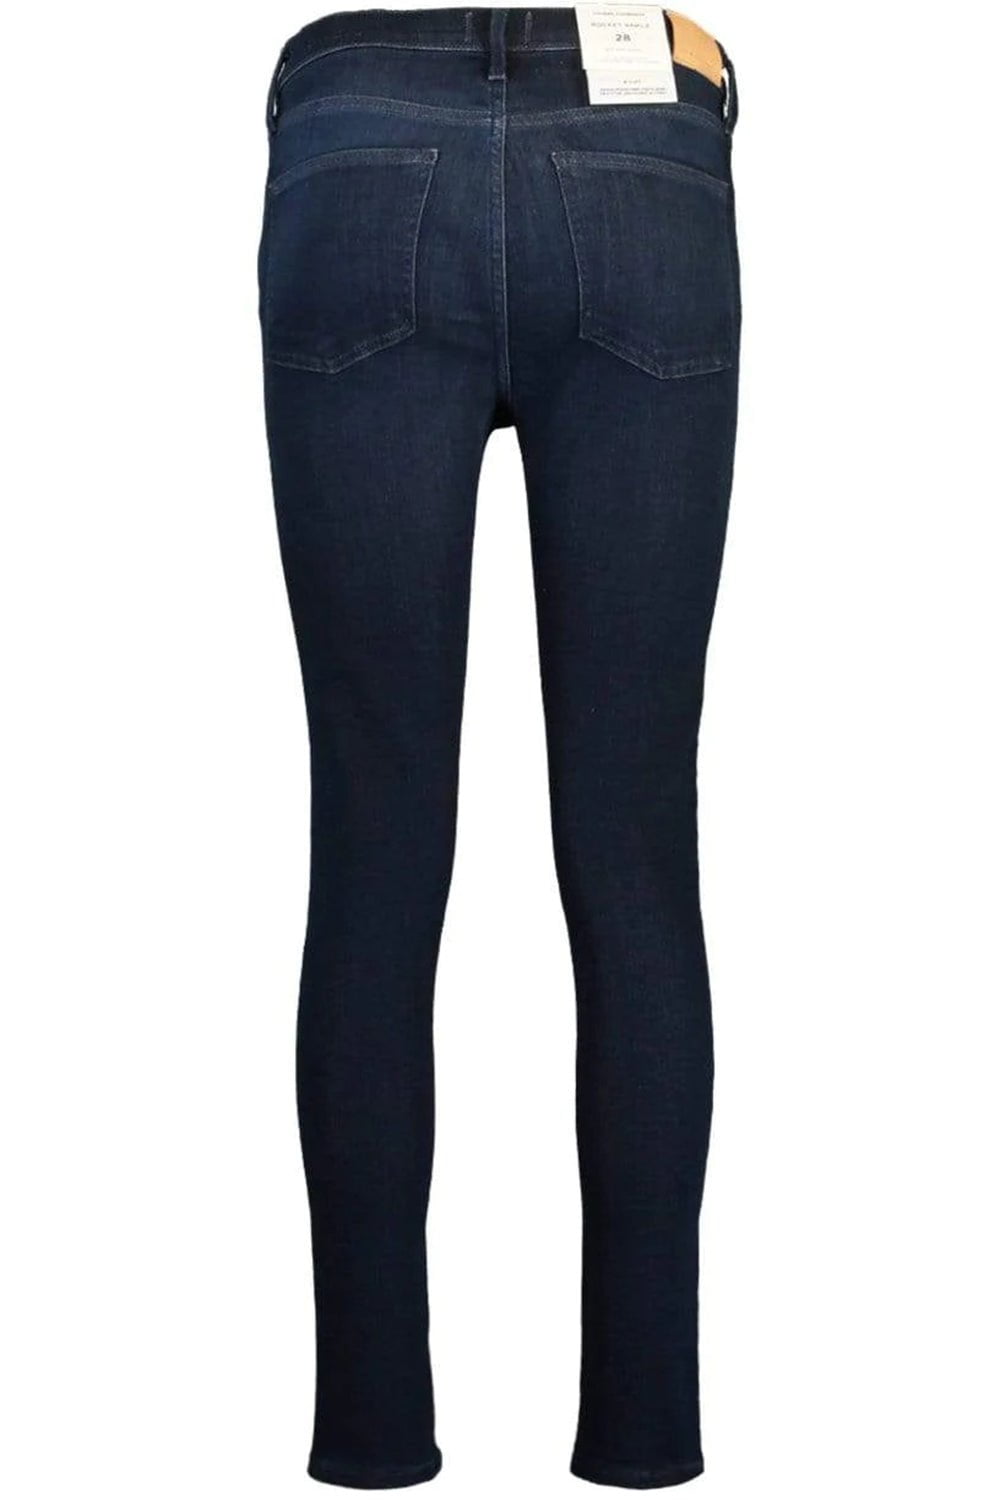 CITIZENS of HUMANITY-Rocket Ankle Mid Rise Skinny Jean-